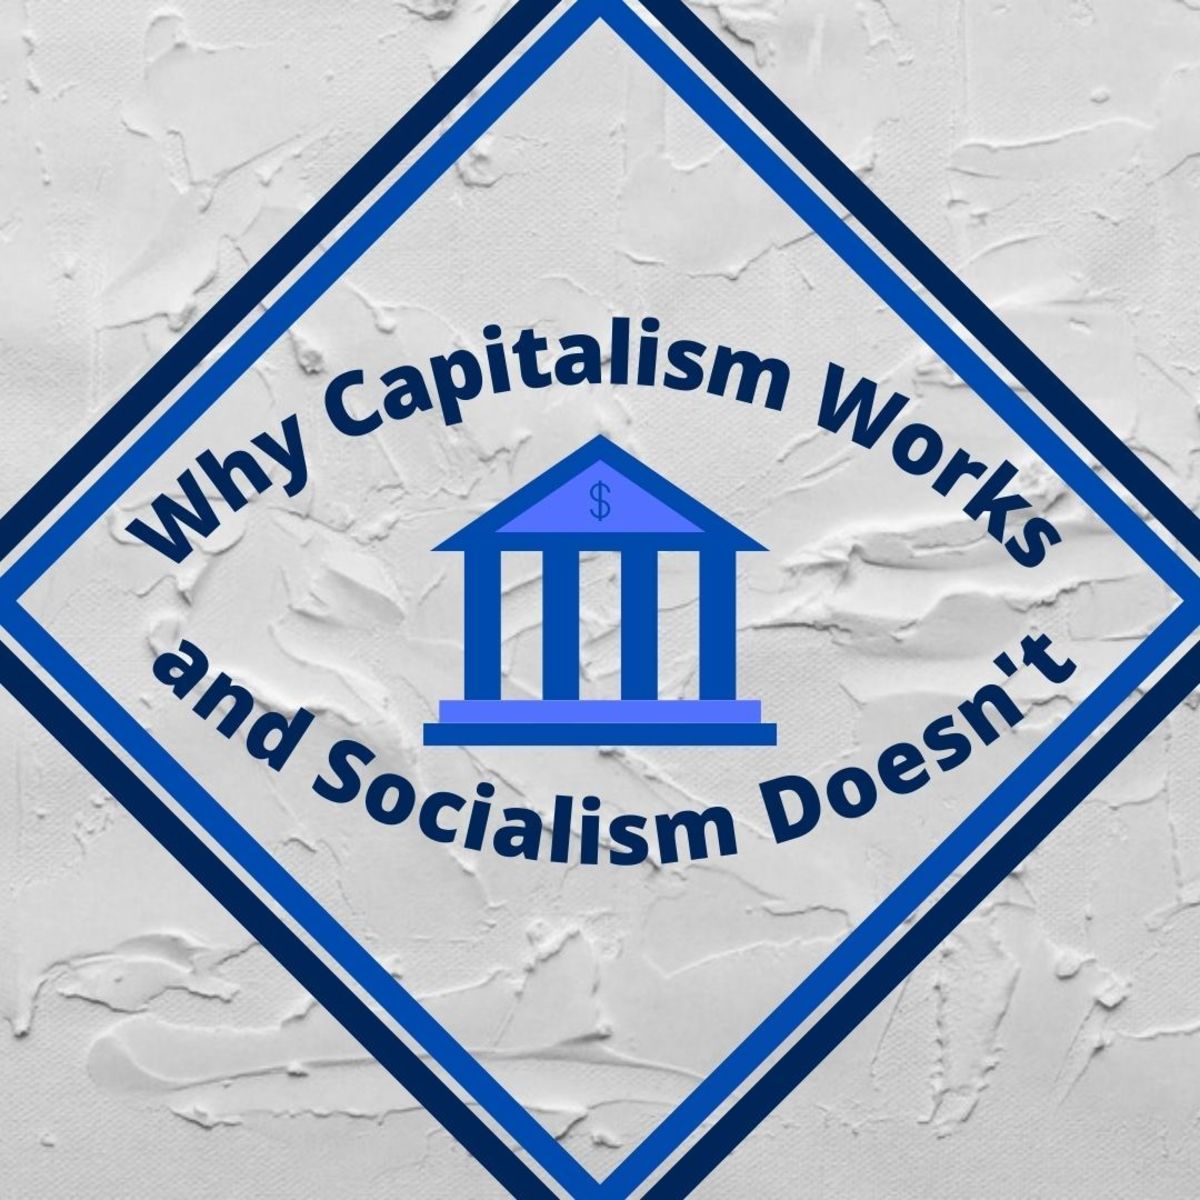 Capitalism and socialism: the two structures that have divided the world on the future of society.